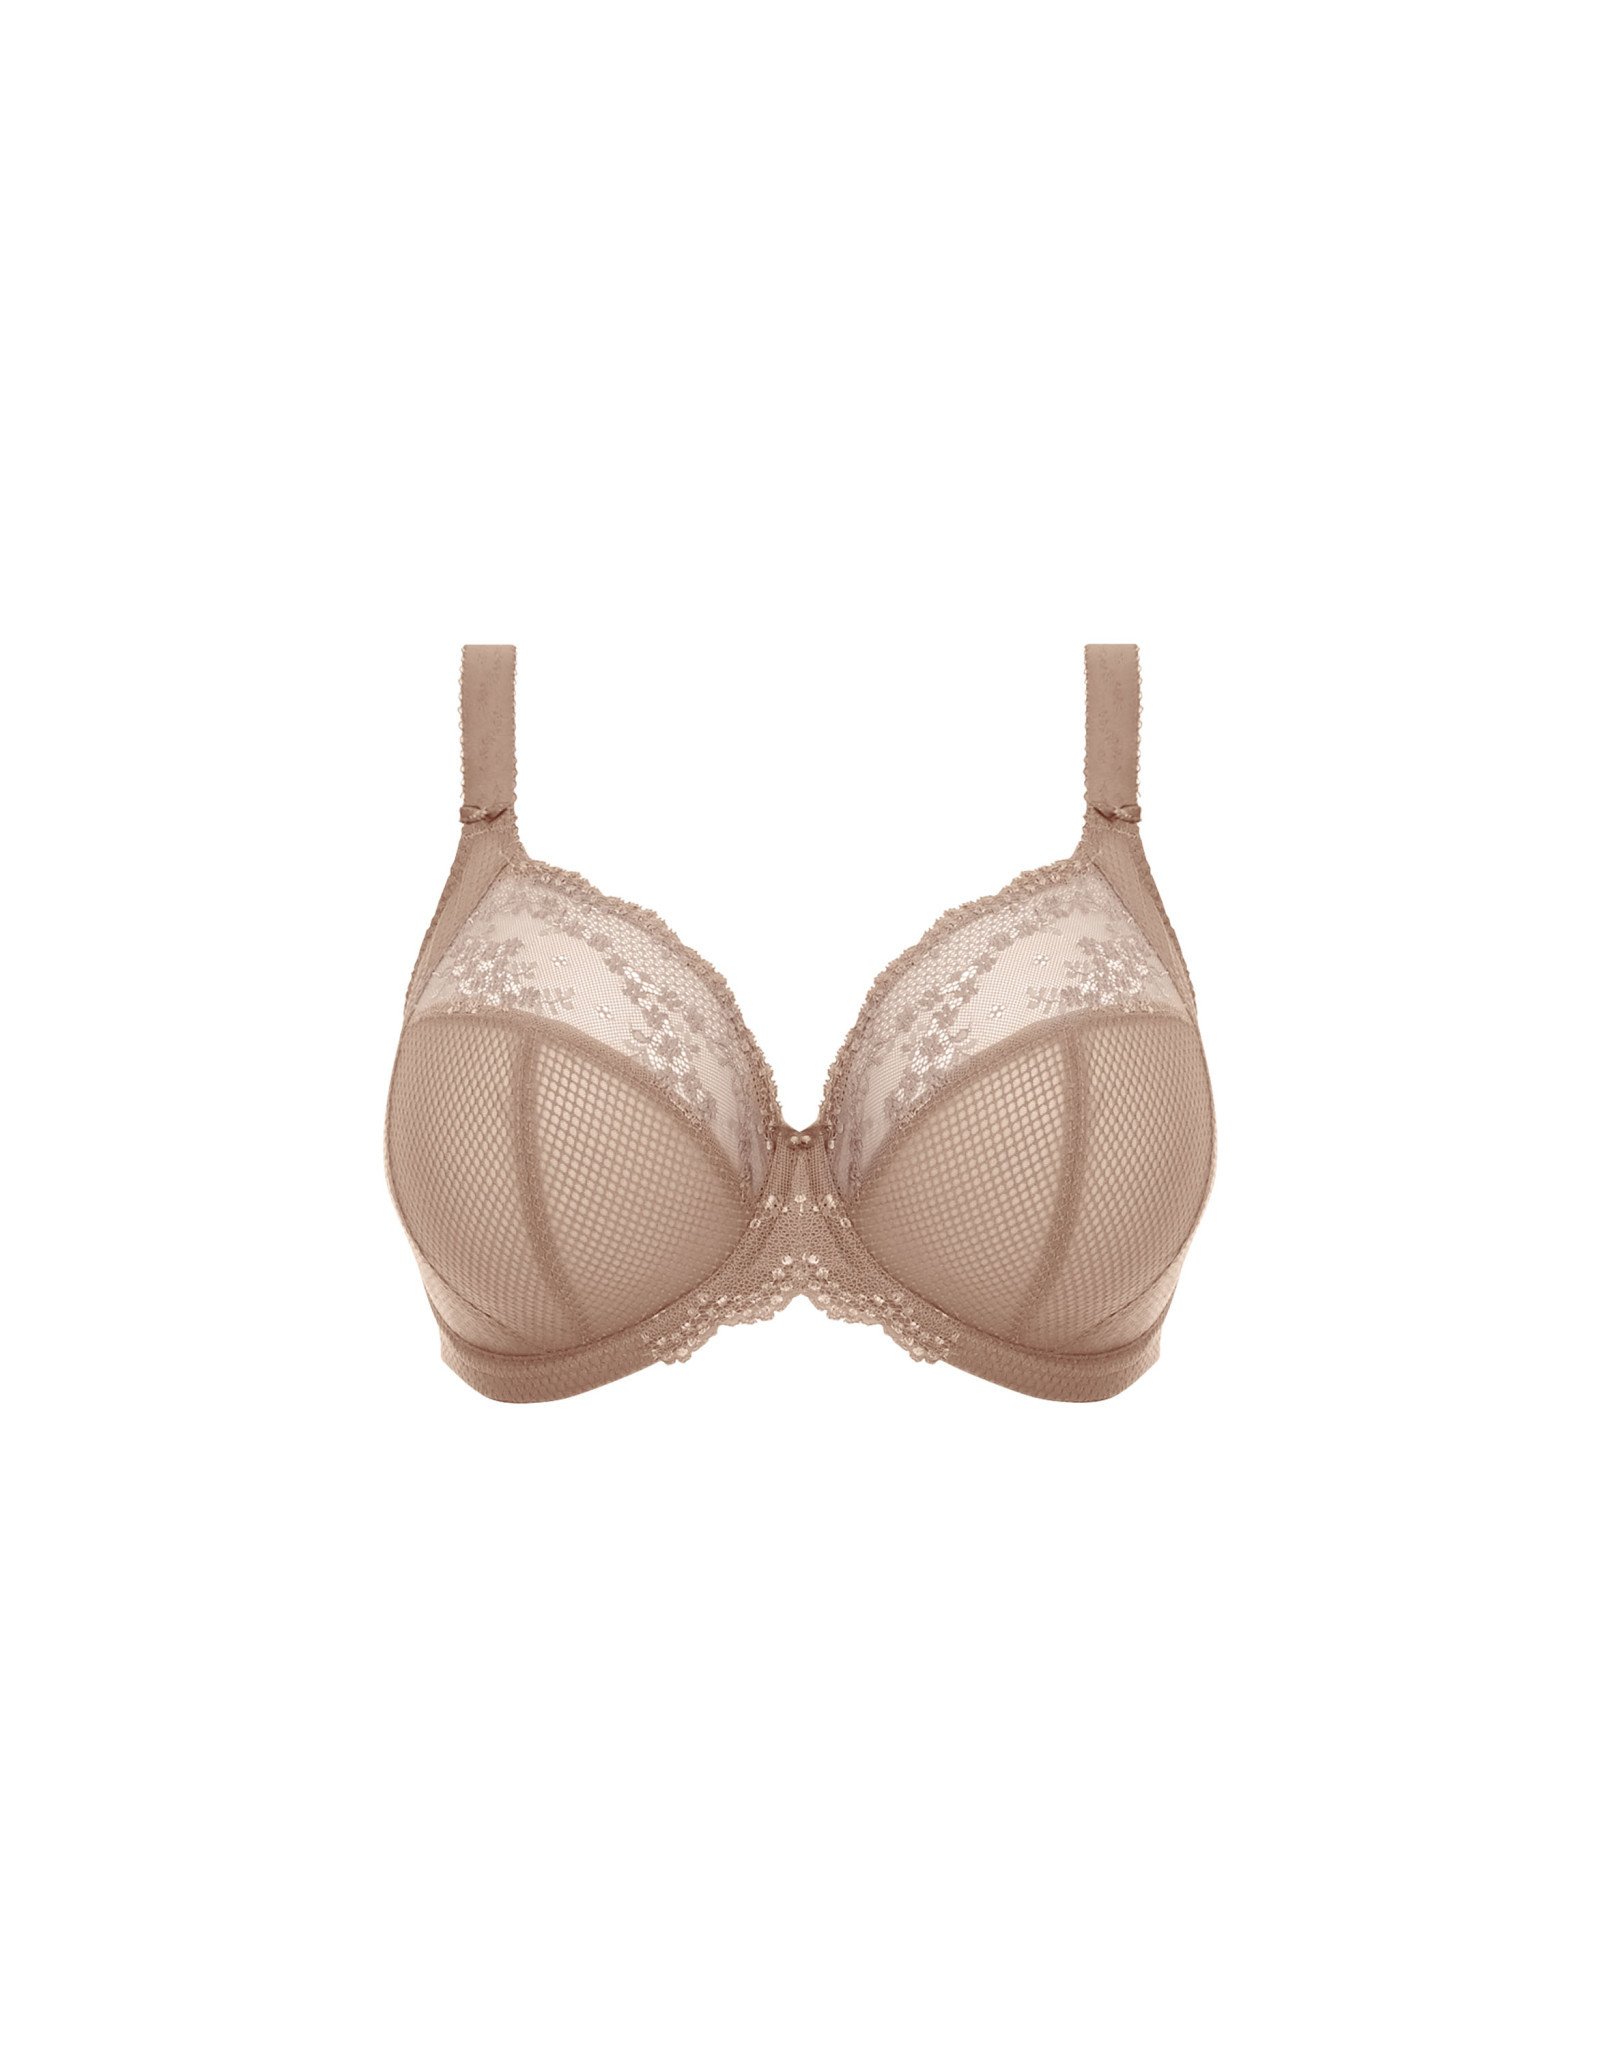 Elomi Charley Underwired Plunge Bra In Storm – The Fitting Room Ilkley